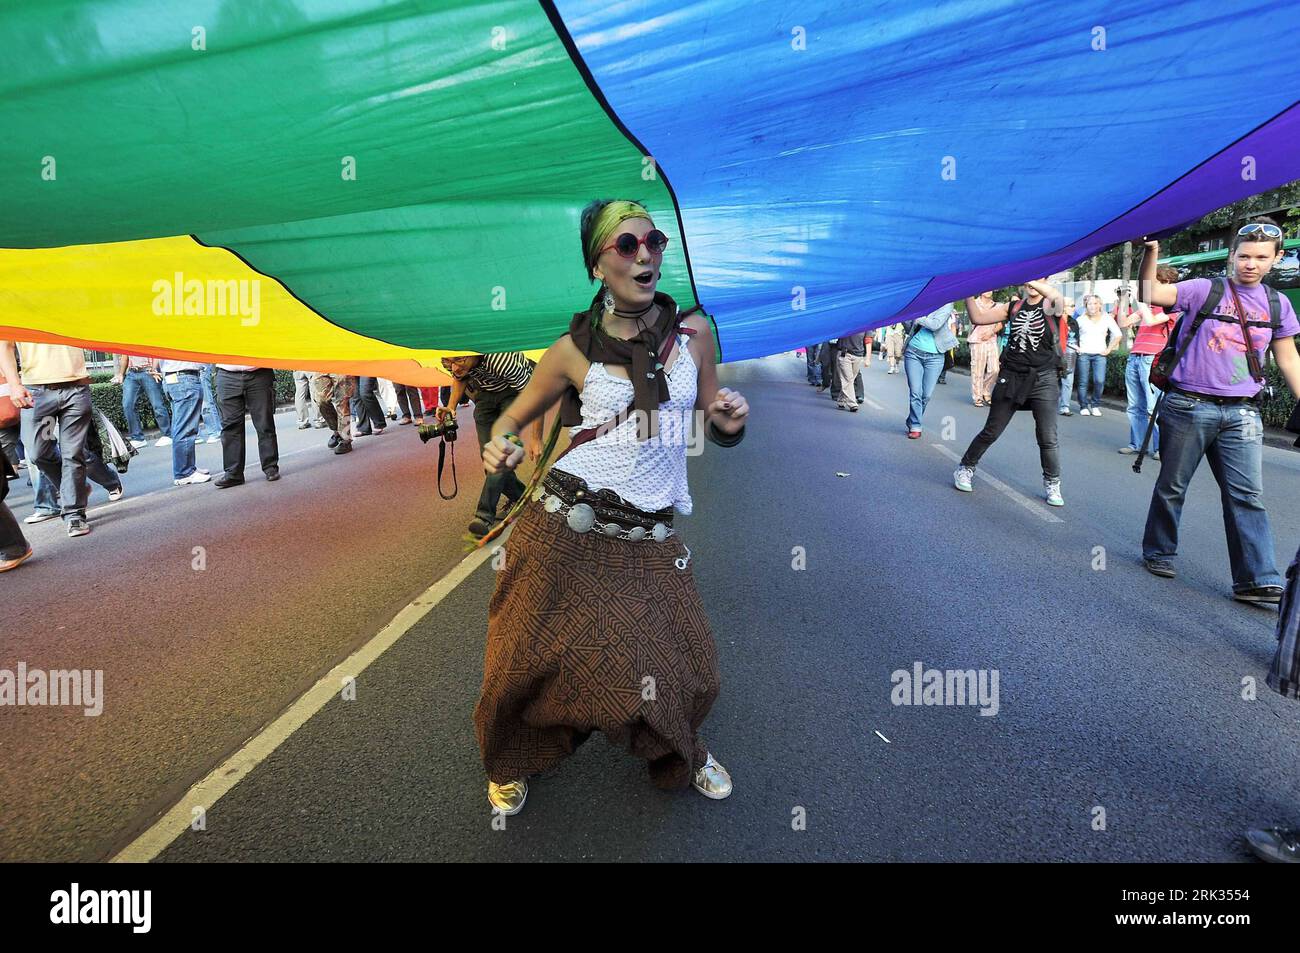 Bildnummer: 53321204  Datum: 05.09.2009  Copyright: imago/Xinhua (090906) -- BUDAPEST, Sept. 6, 2009 (Xinhua) -- A parader dances under a 60-meter-long rainbow flag during the Gay Pride Parade in Budapest, capital of Hungary, Sept. 5, 2009. Some 1,500 secured by police held a Gay Pride Parade here on Saturday. (Xinhua/Kovacs Tamas) (gxr) (2)HUNGARY-BUDAPEST-GAY PRIDE PARADE PUBLICATIONxNOTxINxCHN Homosexualität Ungarn Europa premiumd kbdig xng 2009 quer     Bildnummer 53321204 Date 05 09 2009 Copyright Imago XINHUA  Budapest Sept 6 2009 XINHUA a  Dances Under a 60 Metres Long Rainbow Flag duri Stock Photo